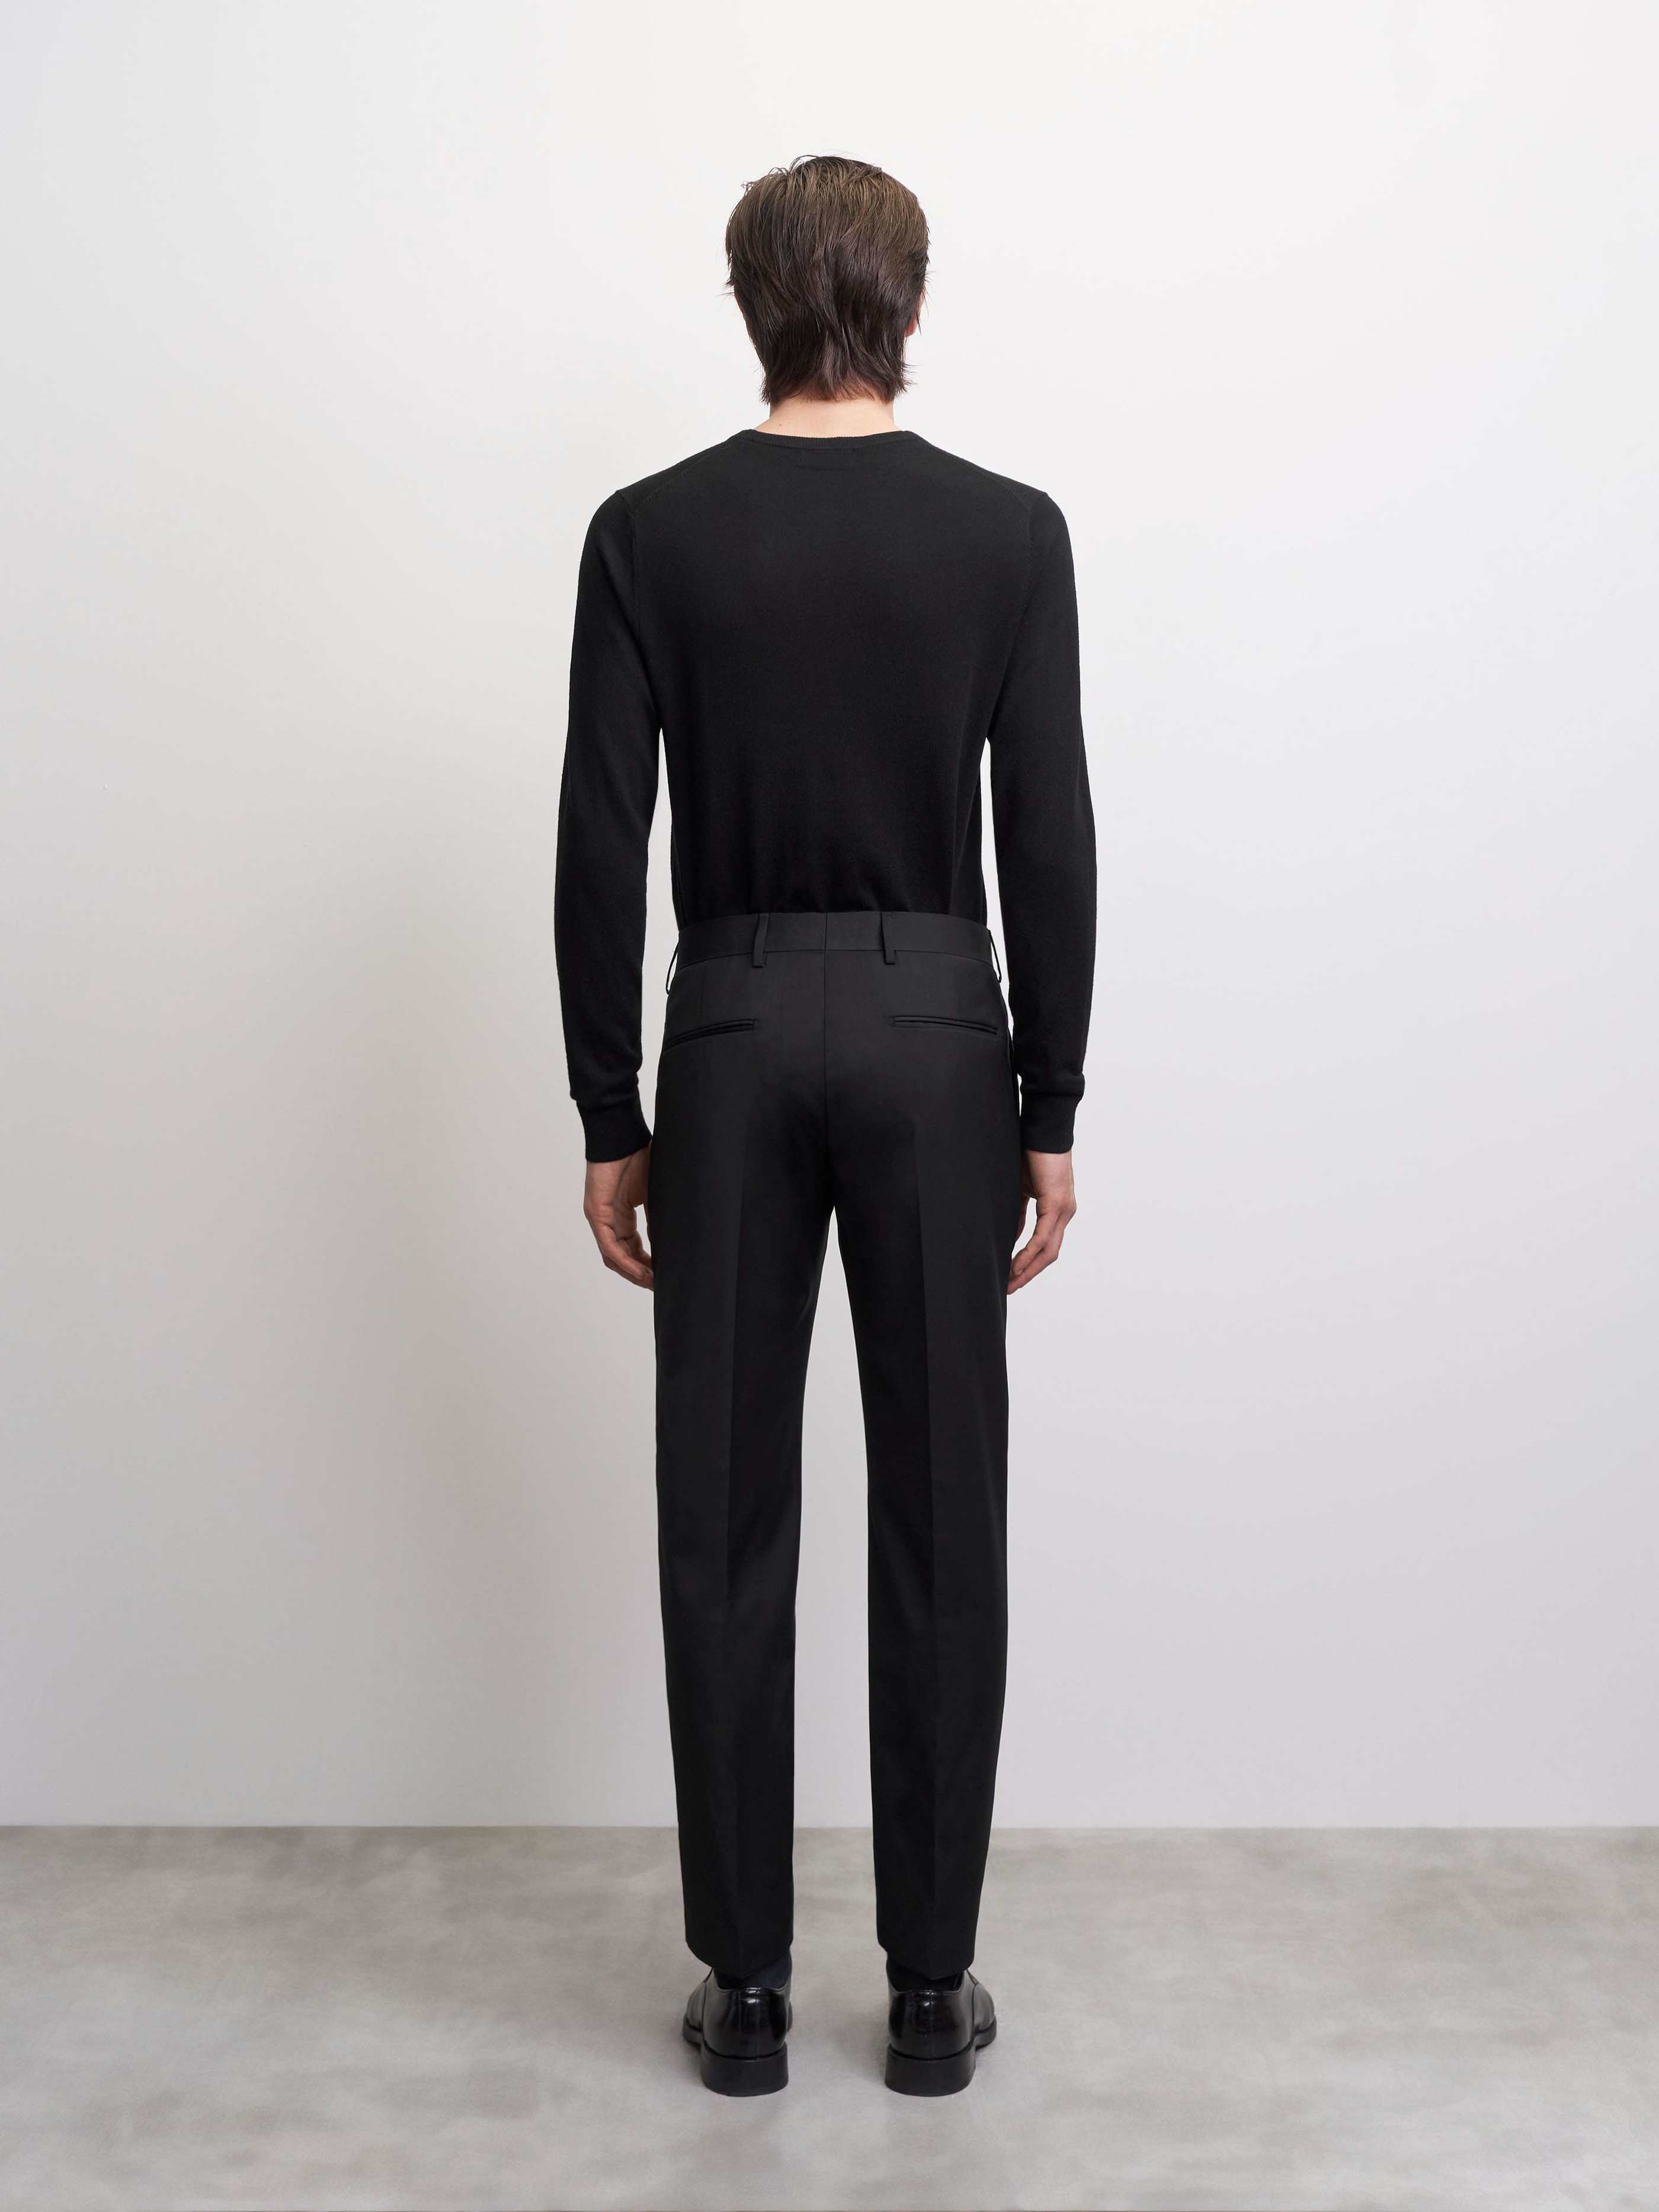 TIGER OF SWEDEN Tenutas Trousers in Black T70698004Z 46 050-BLACK FROM EIGHTYWINGOLD - OFFICIAL BRAND PARTNER